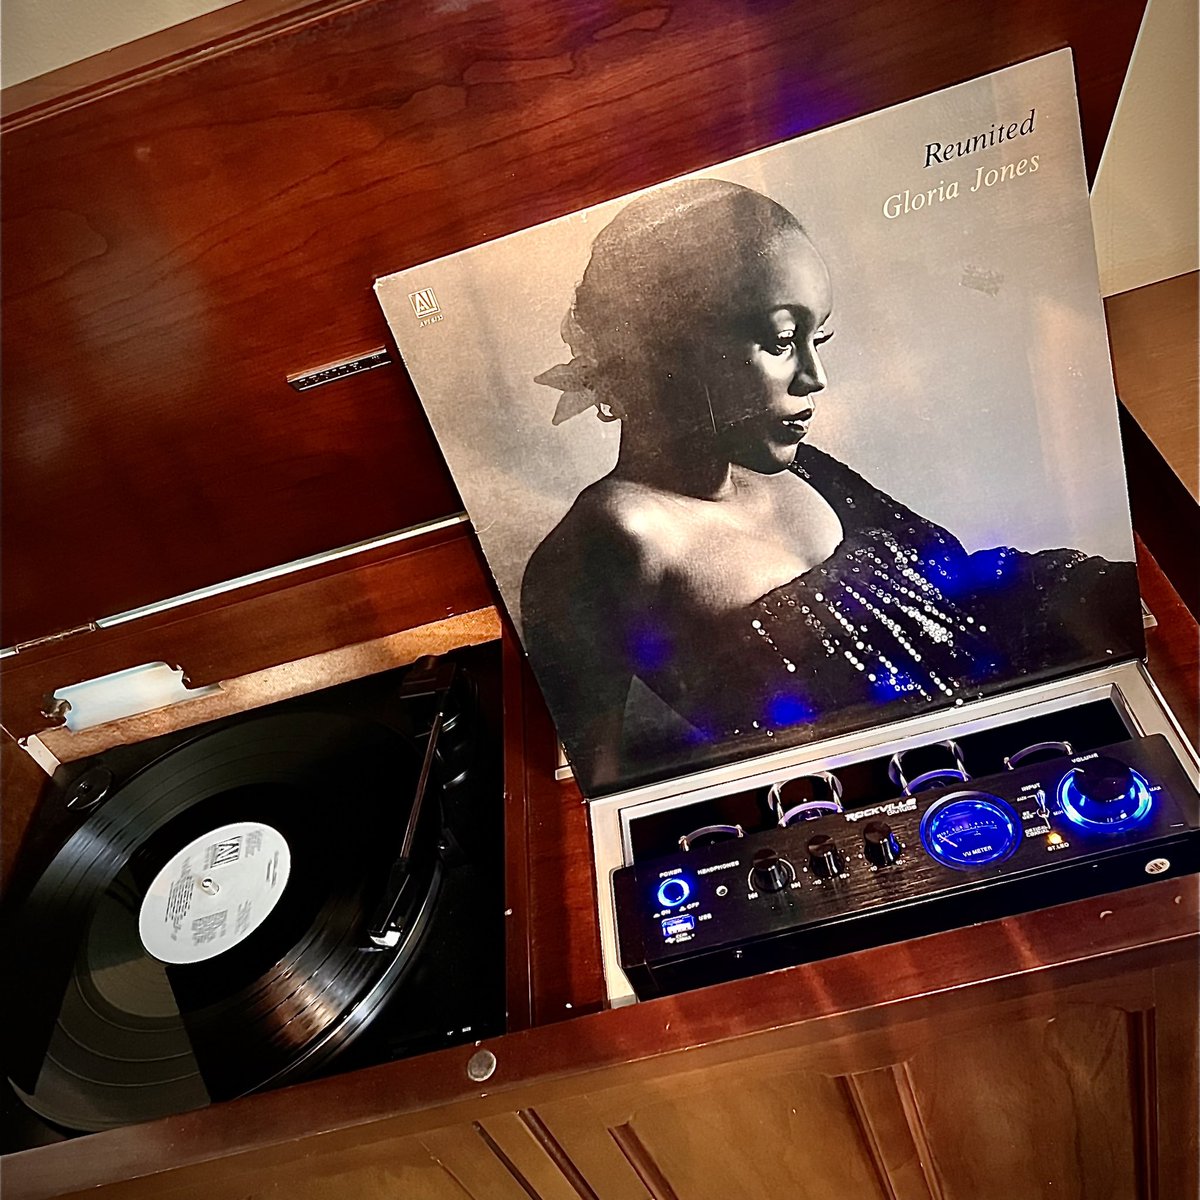 Spinning #GloriaJones after hearing an incredible performance of @thefrestonians covering #TaintedLove… FANTASTIC!! ❤️🤘 Haven’t found #Vixen LP yet… So how about #Reunited? AMAZING musician, singer and songwriter… AWESOME ❤️🤘 And it’s what’s spinning in Pittsburgh…